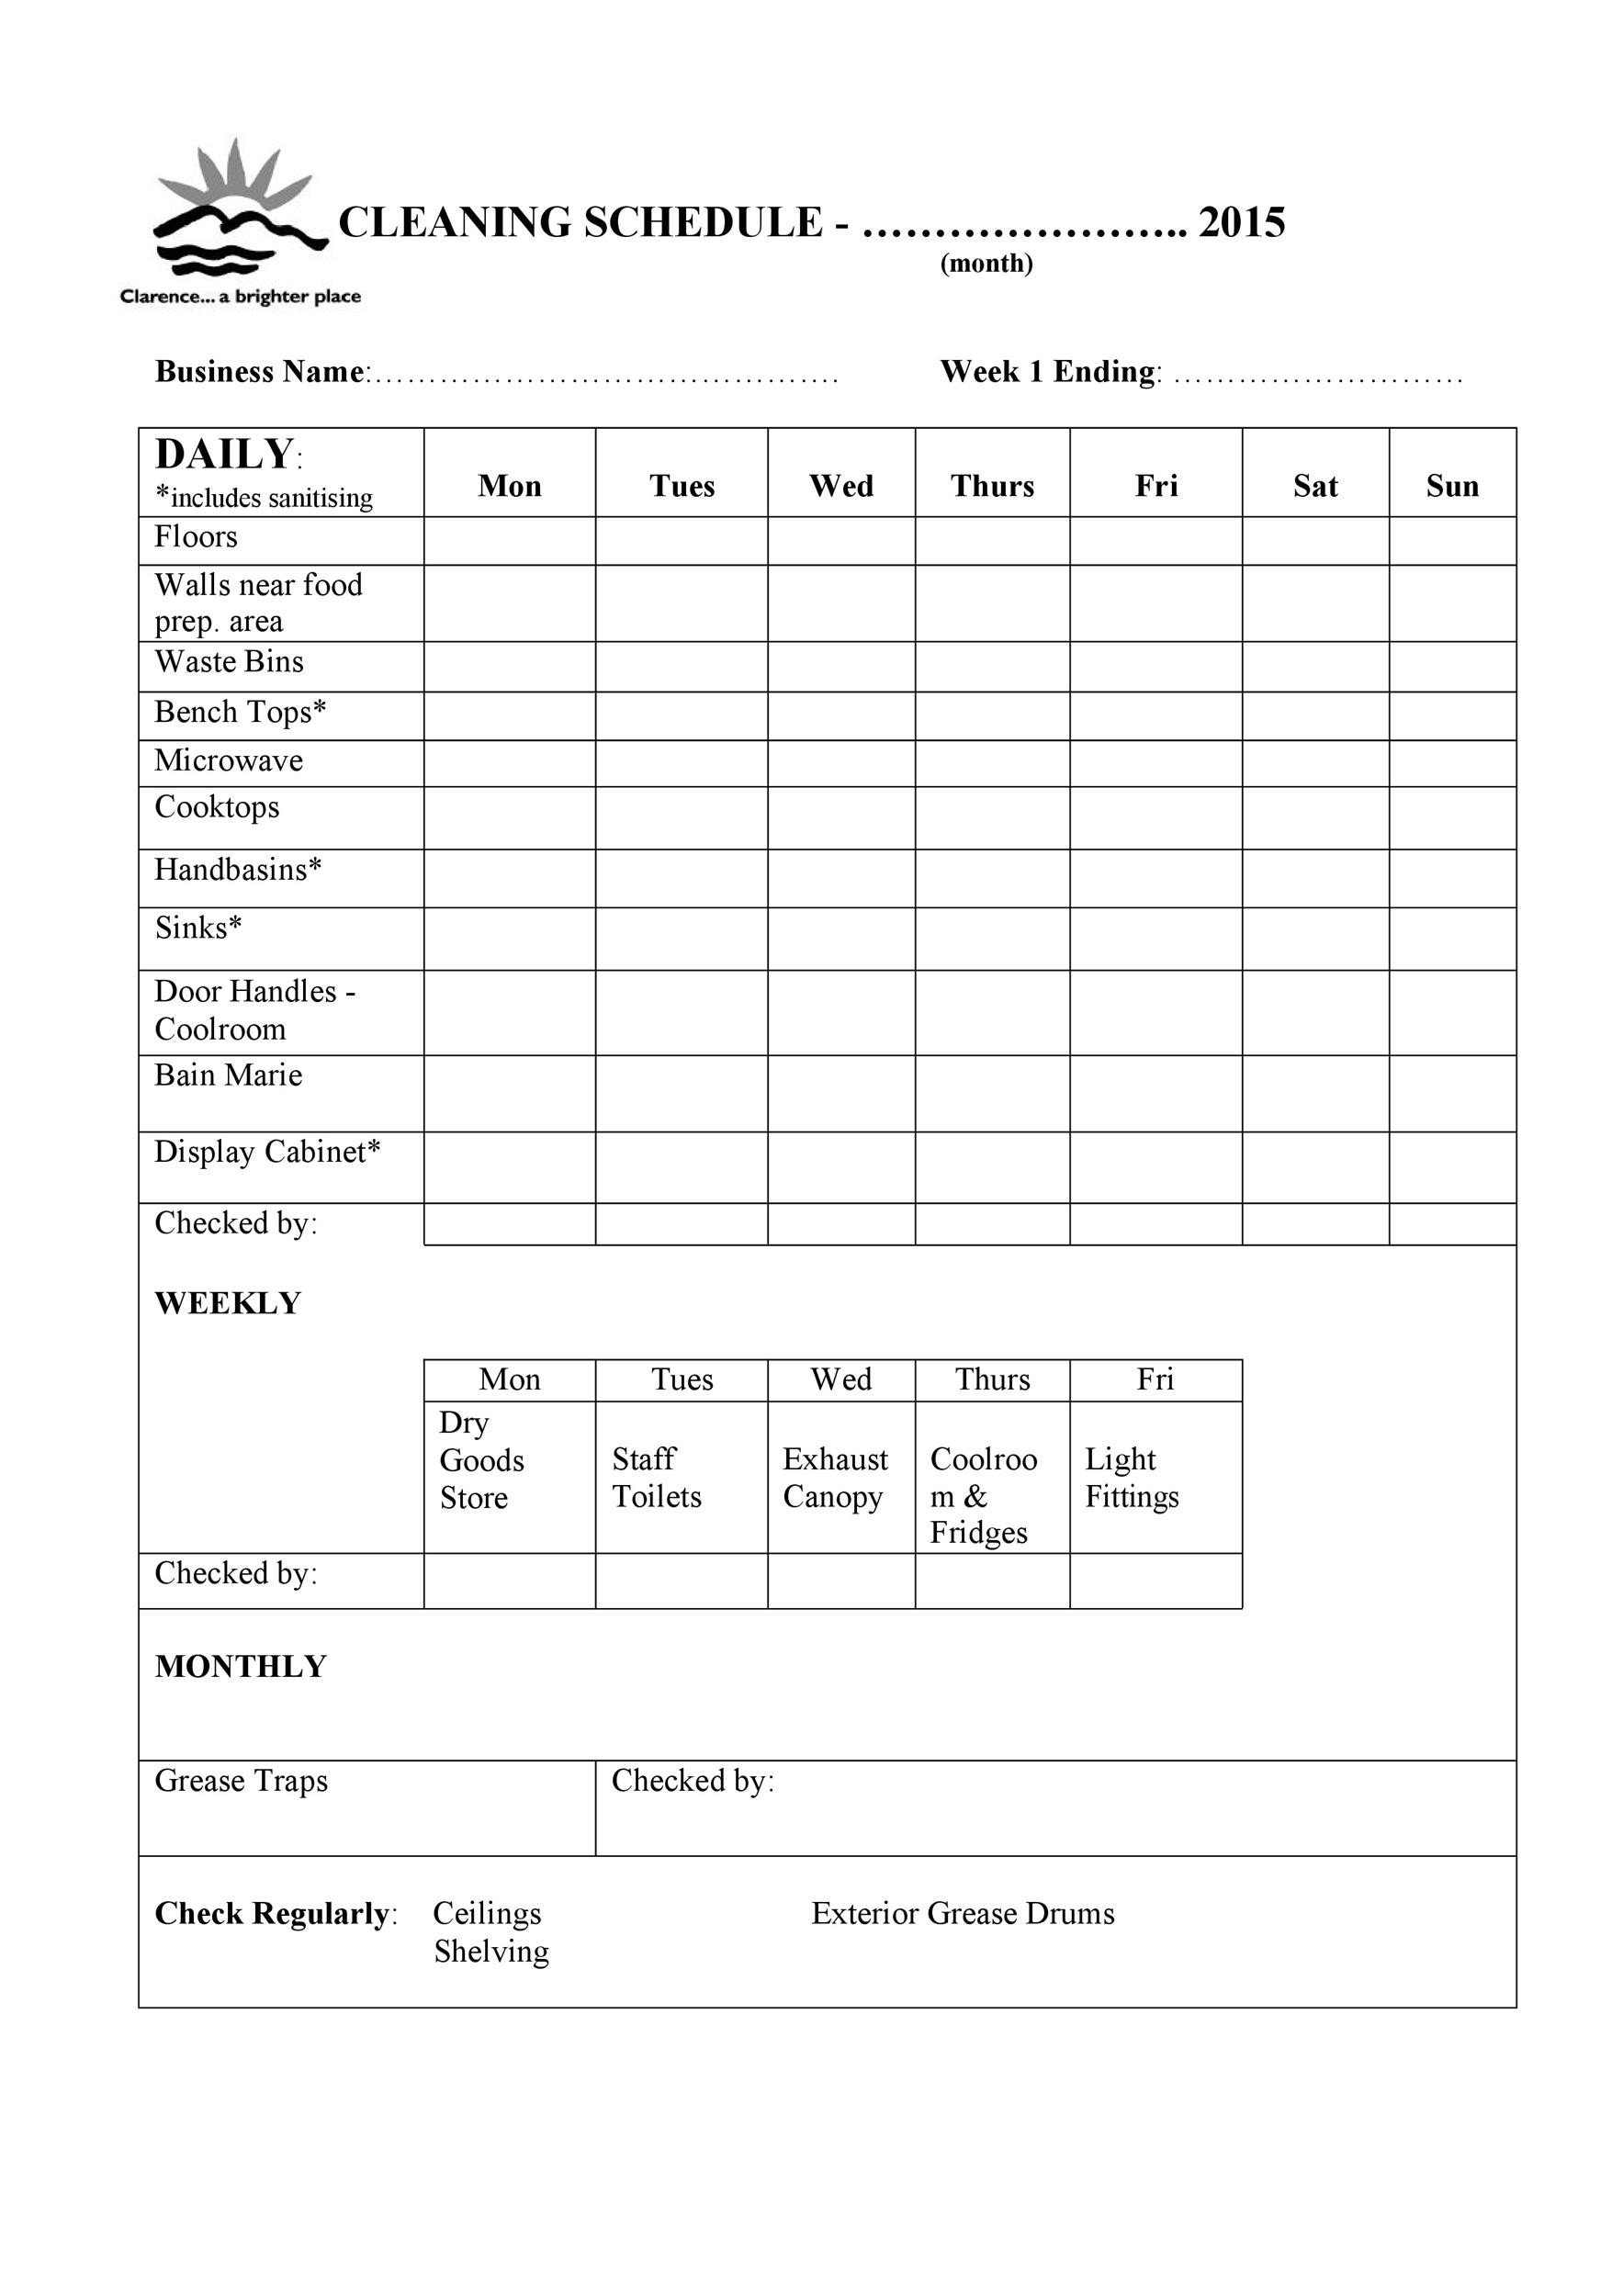 Laboratory Housekeeping Cleaning Checklist Printable | www ...